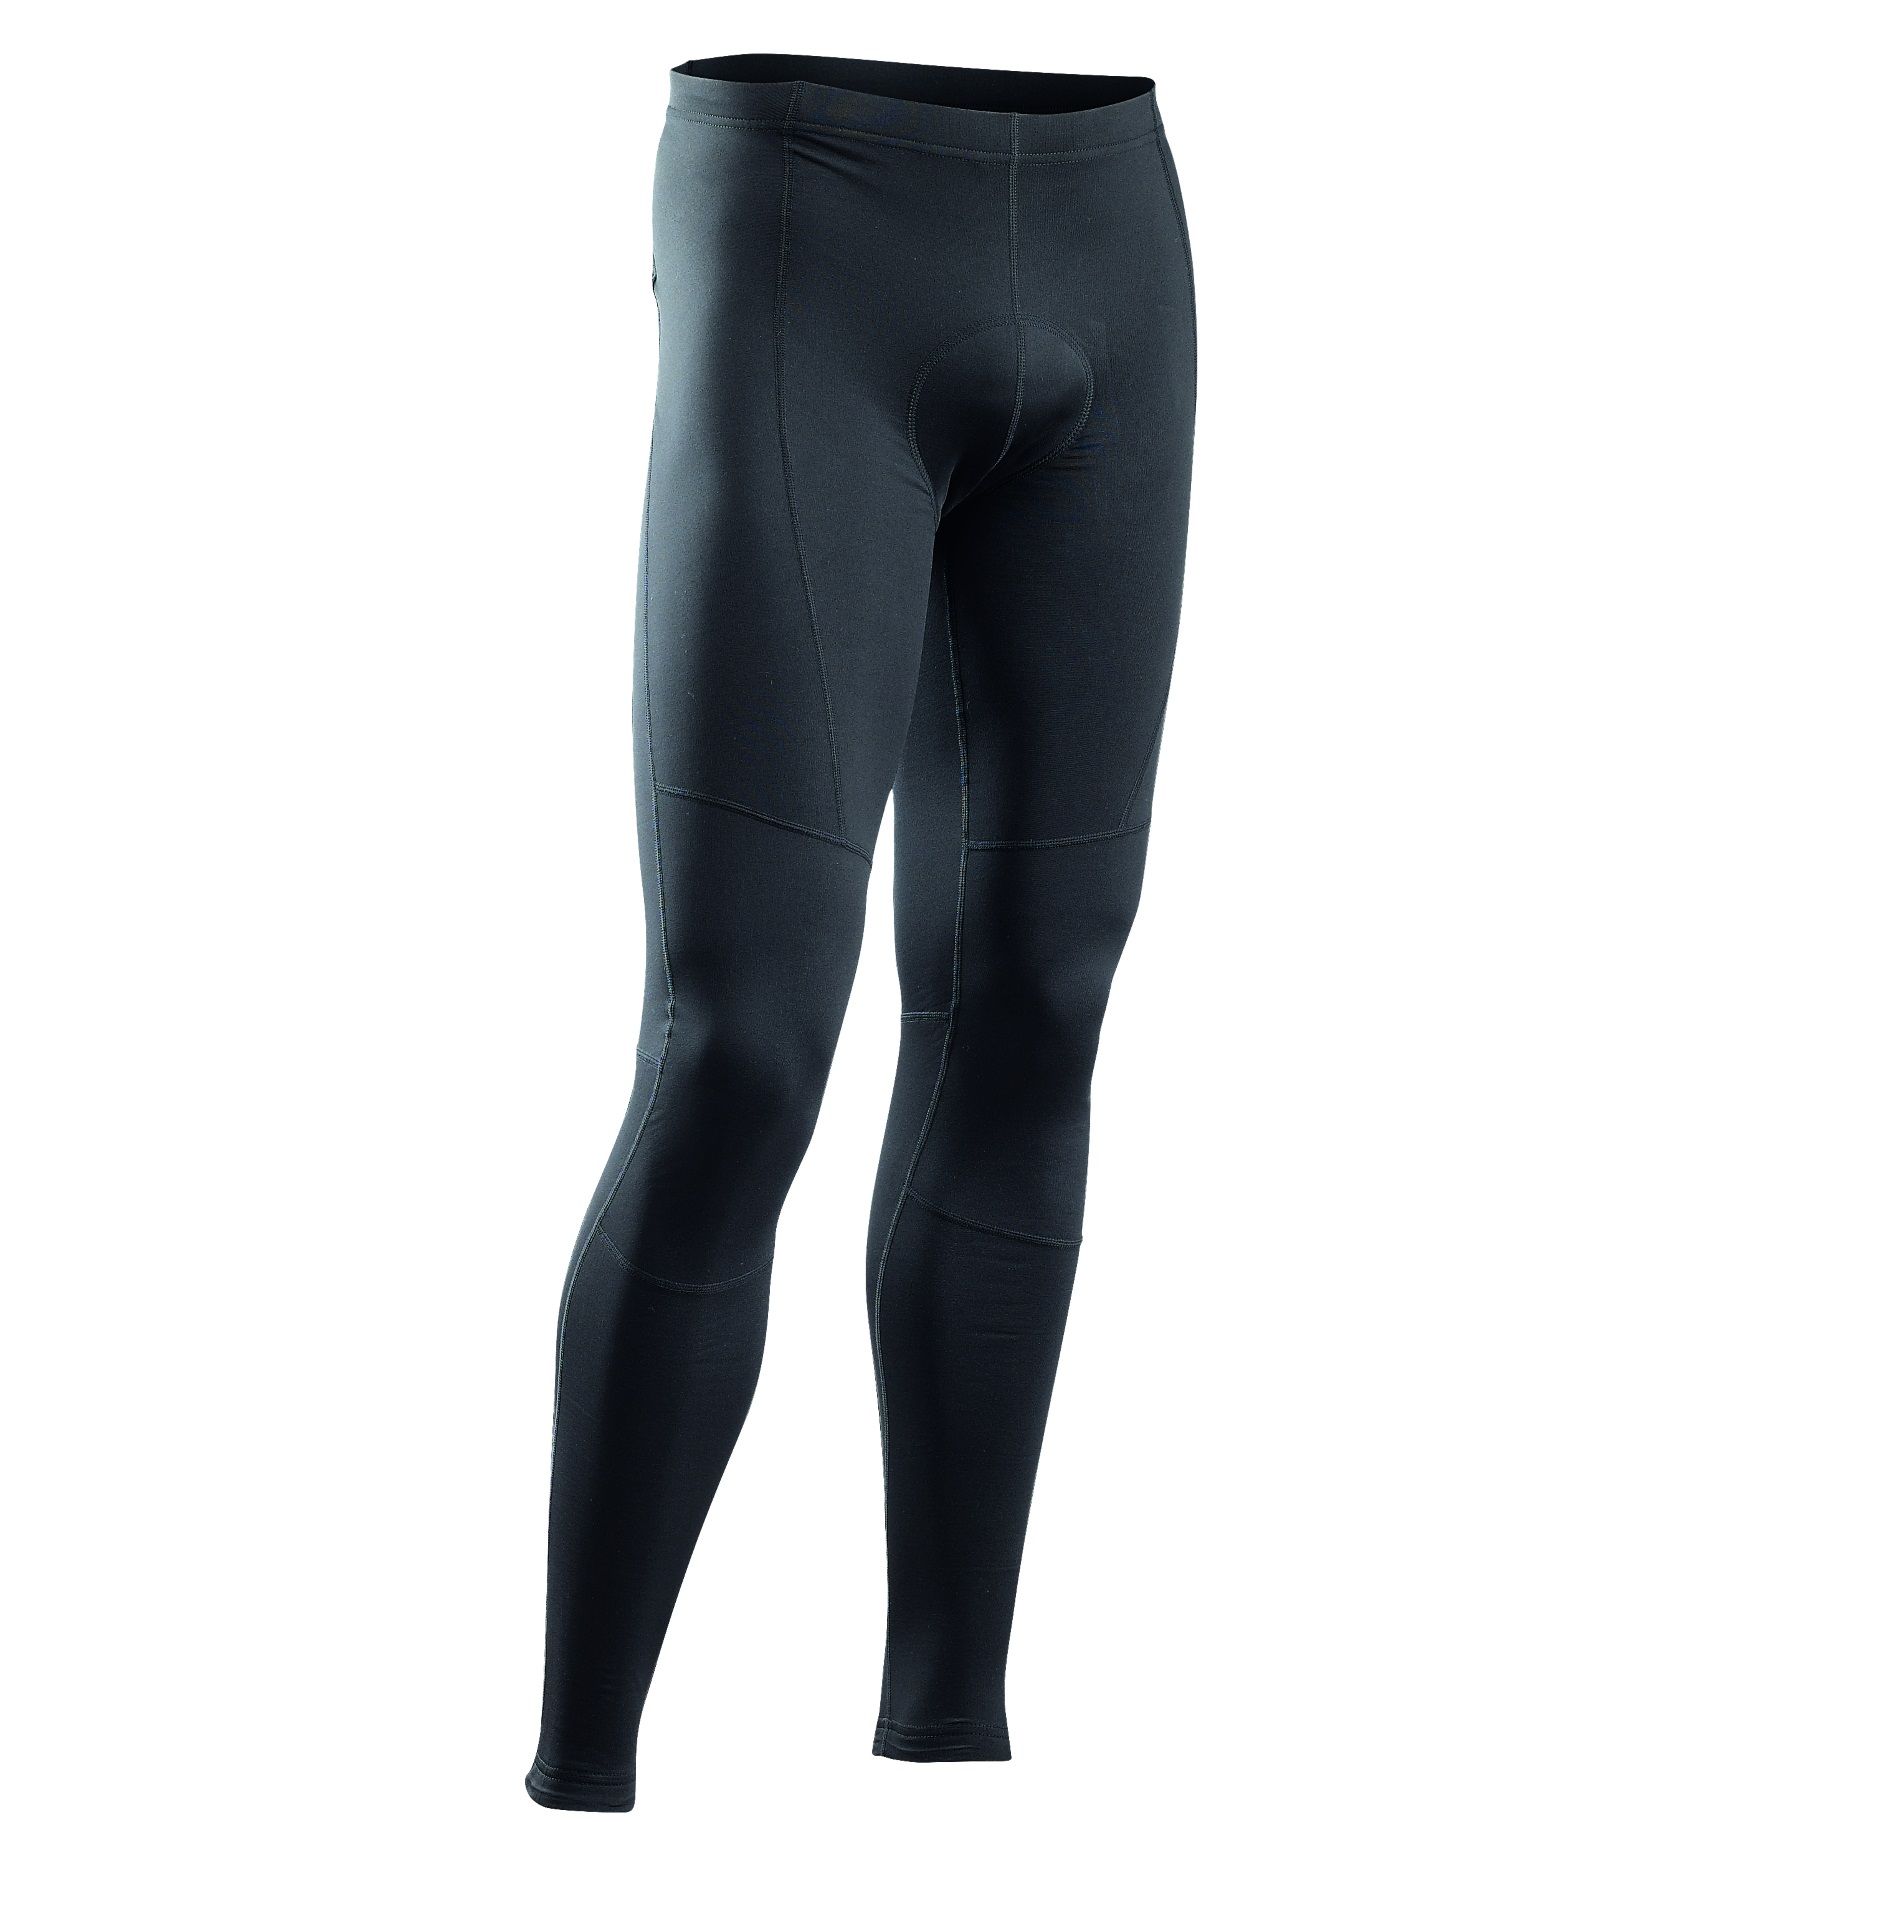 Northwave Force 2 Mens Padded Tights - Tights - Legwear - Clothing